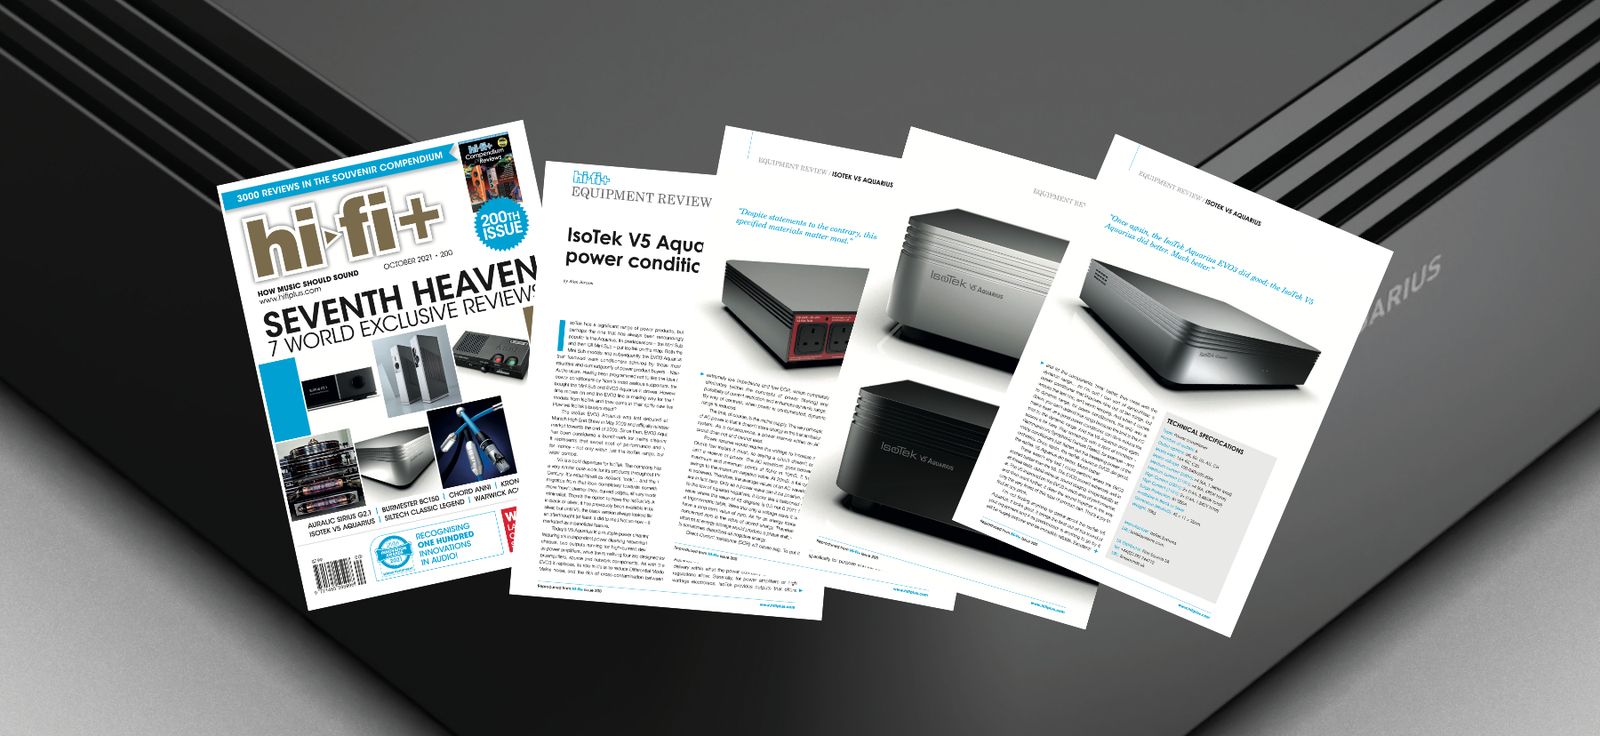 The IsoTek V5 Aquarius "drew the sound together in the way only the very finest of this type of product can," says Alan Sircom from Hi-Fi+ Magazine